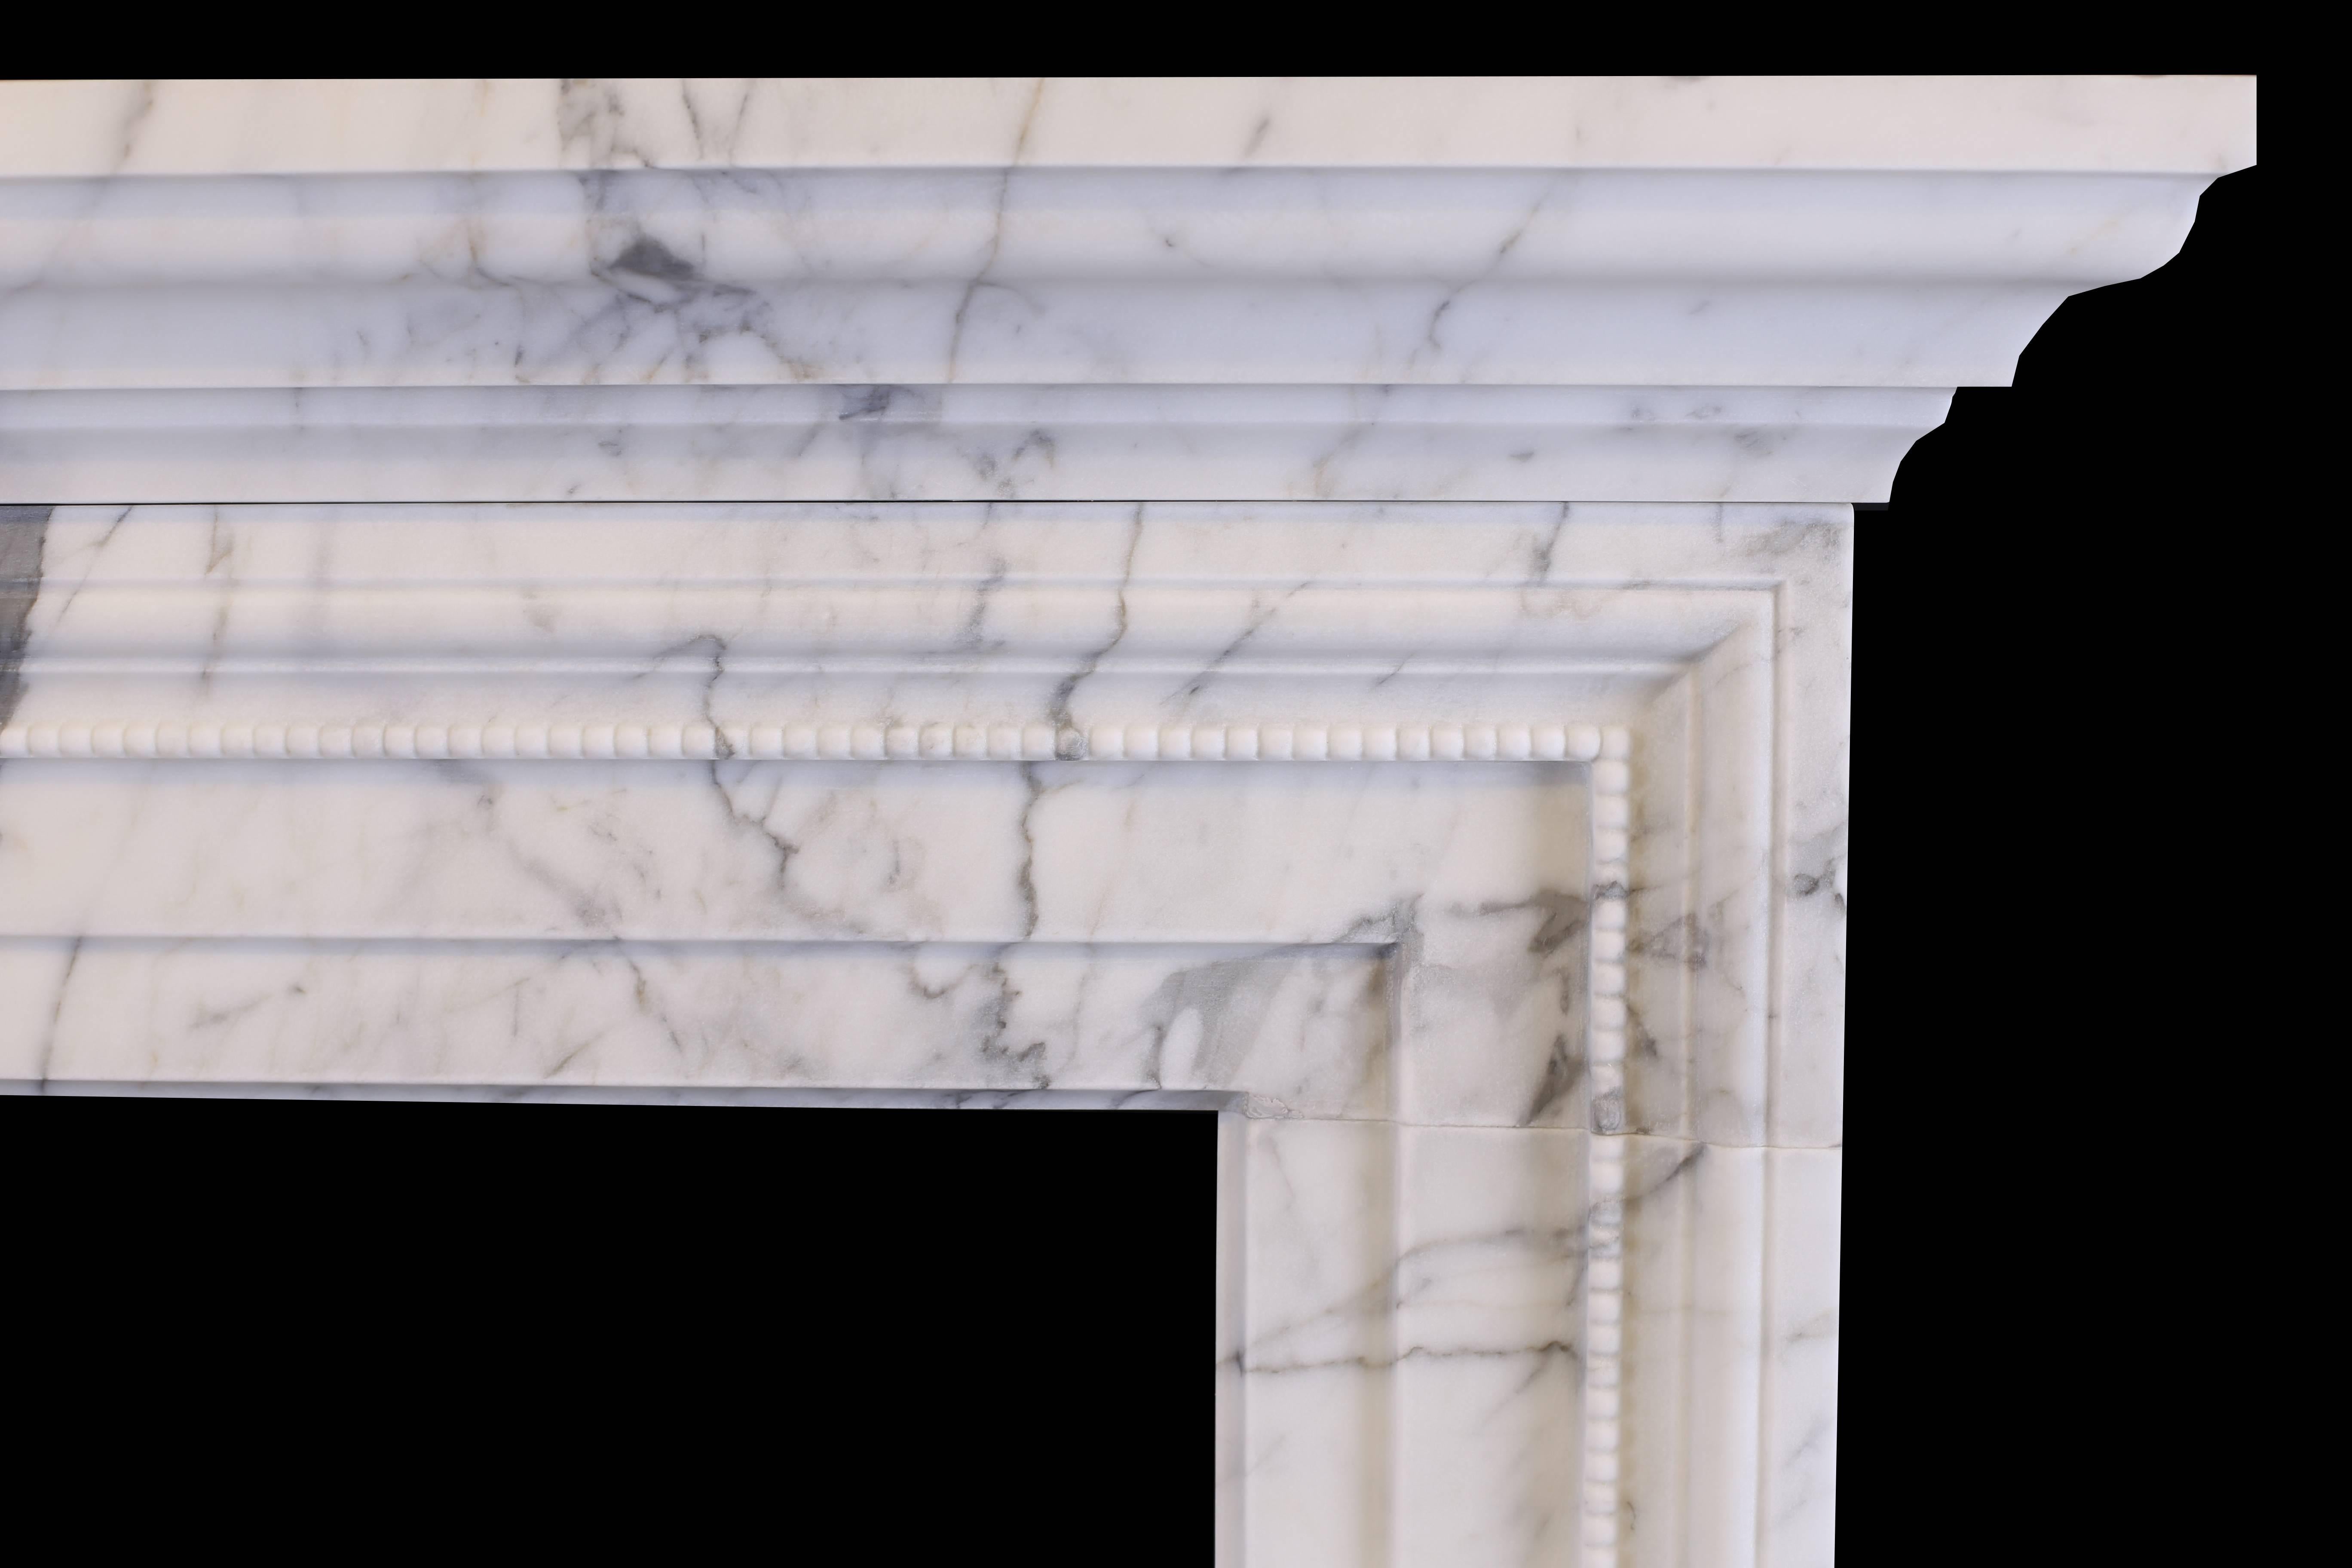 A stylish English Regency bolection chimneypiece in high quality Italian white statuary marble, moulded frieze and jambs of architectural form and the inner moulding with beading, also with grand moulded shelf above.

Measurements:
Depth 4 1/2 in